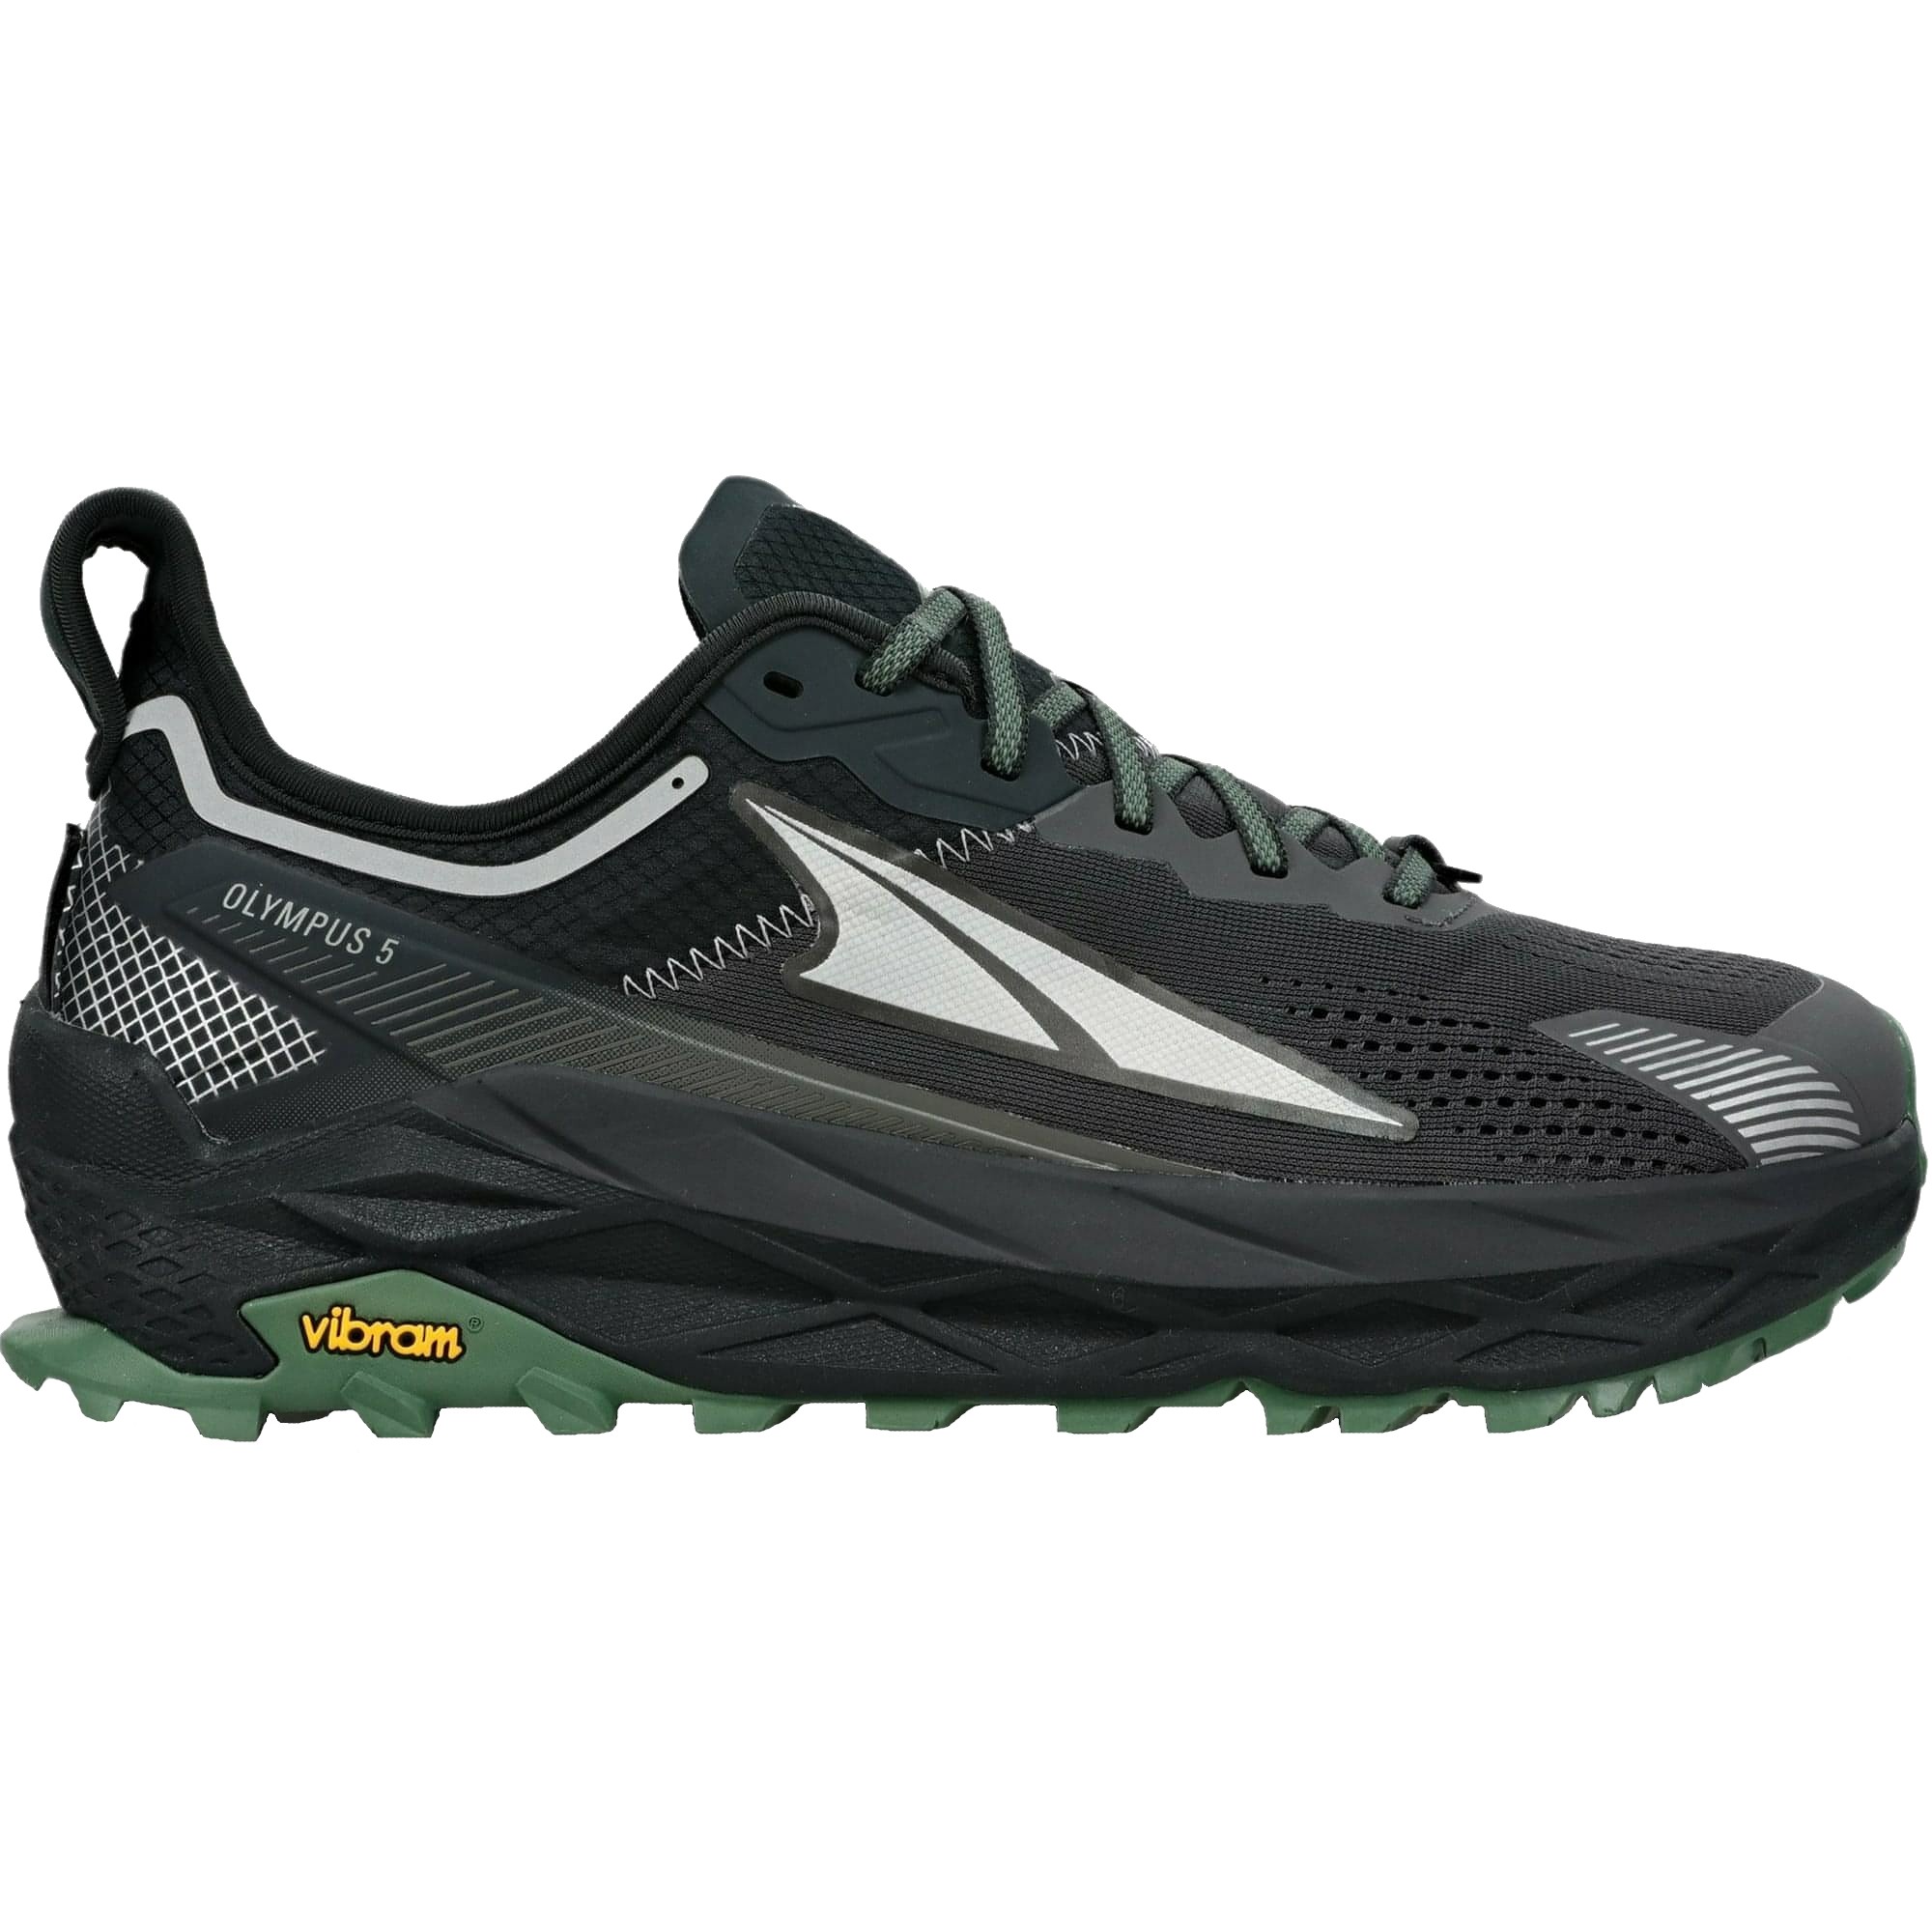 Altra Olympus 5 Men's Trail Running Shoes